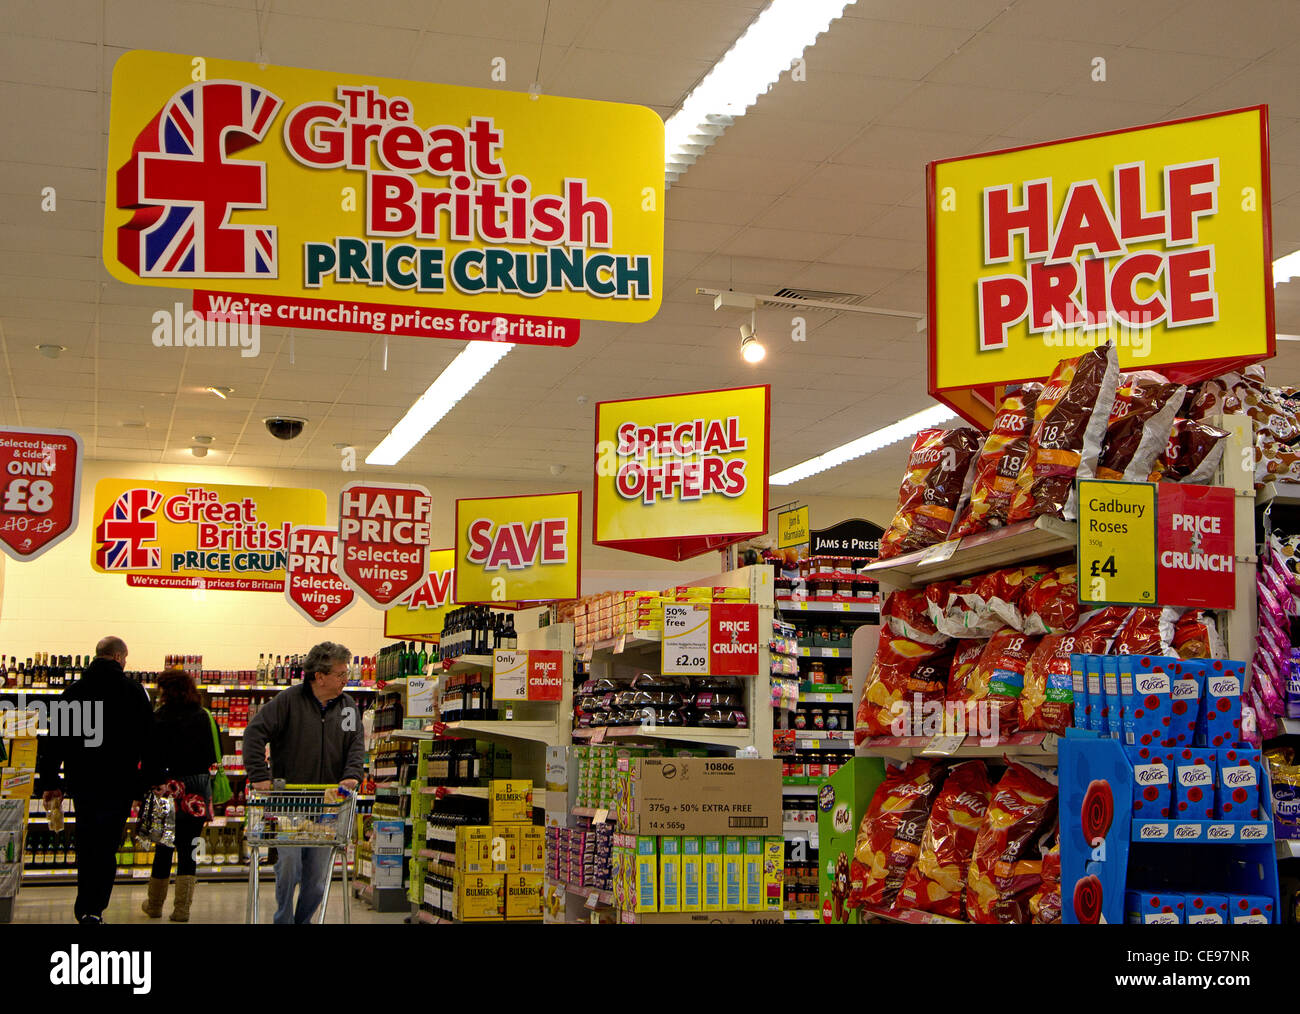 Half price and special offer posters in a Morrisons supermarket, UK Stock Photo